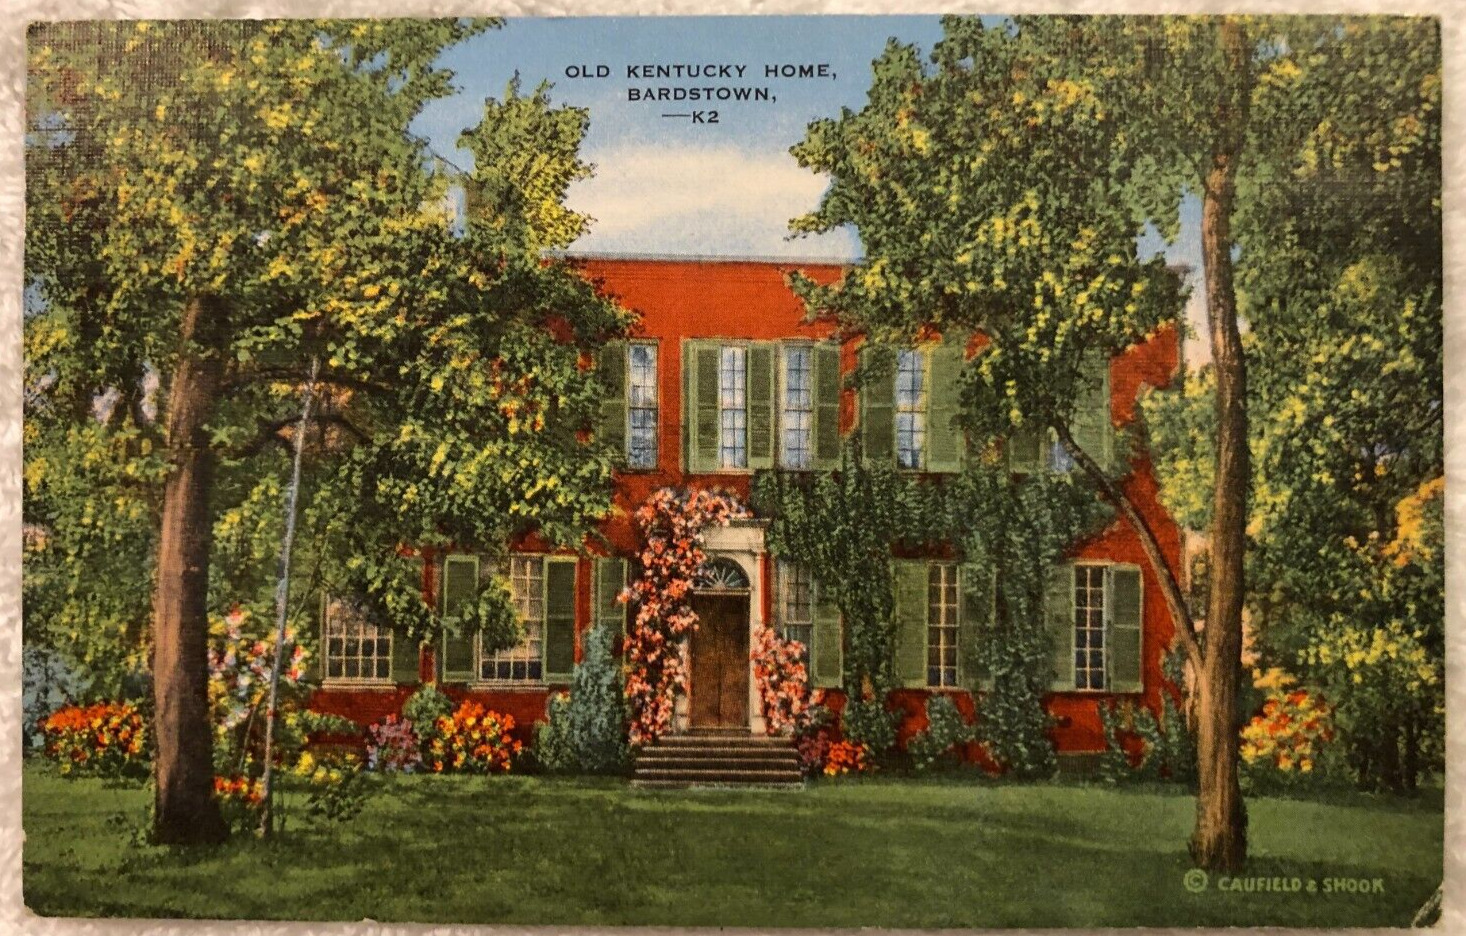 Old Kentucky Home Bardstown Kentucky Vintage Postcard, Posted 1947